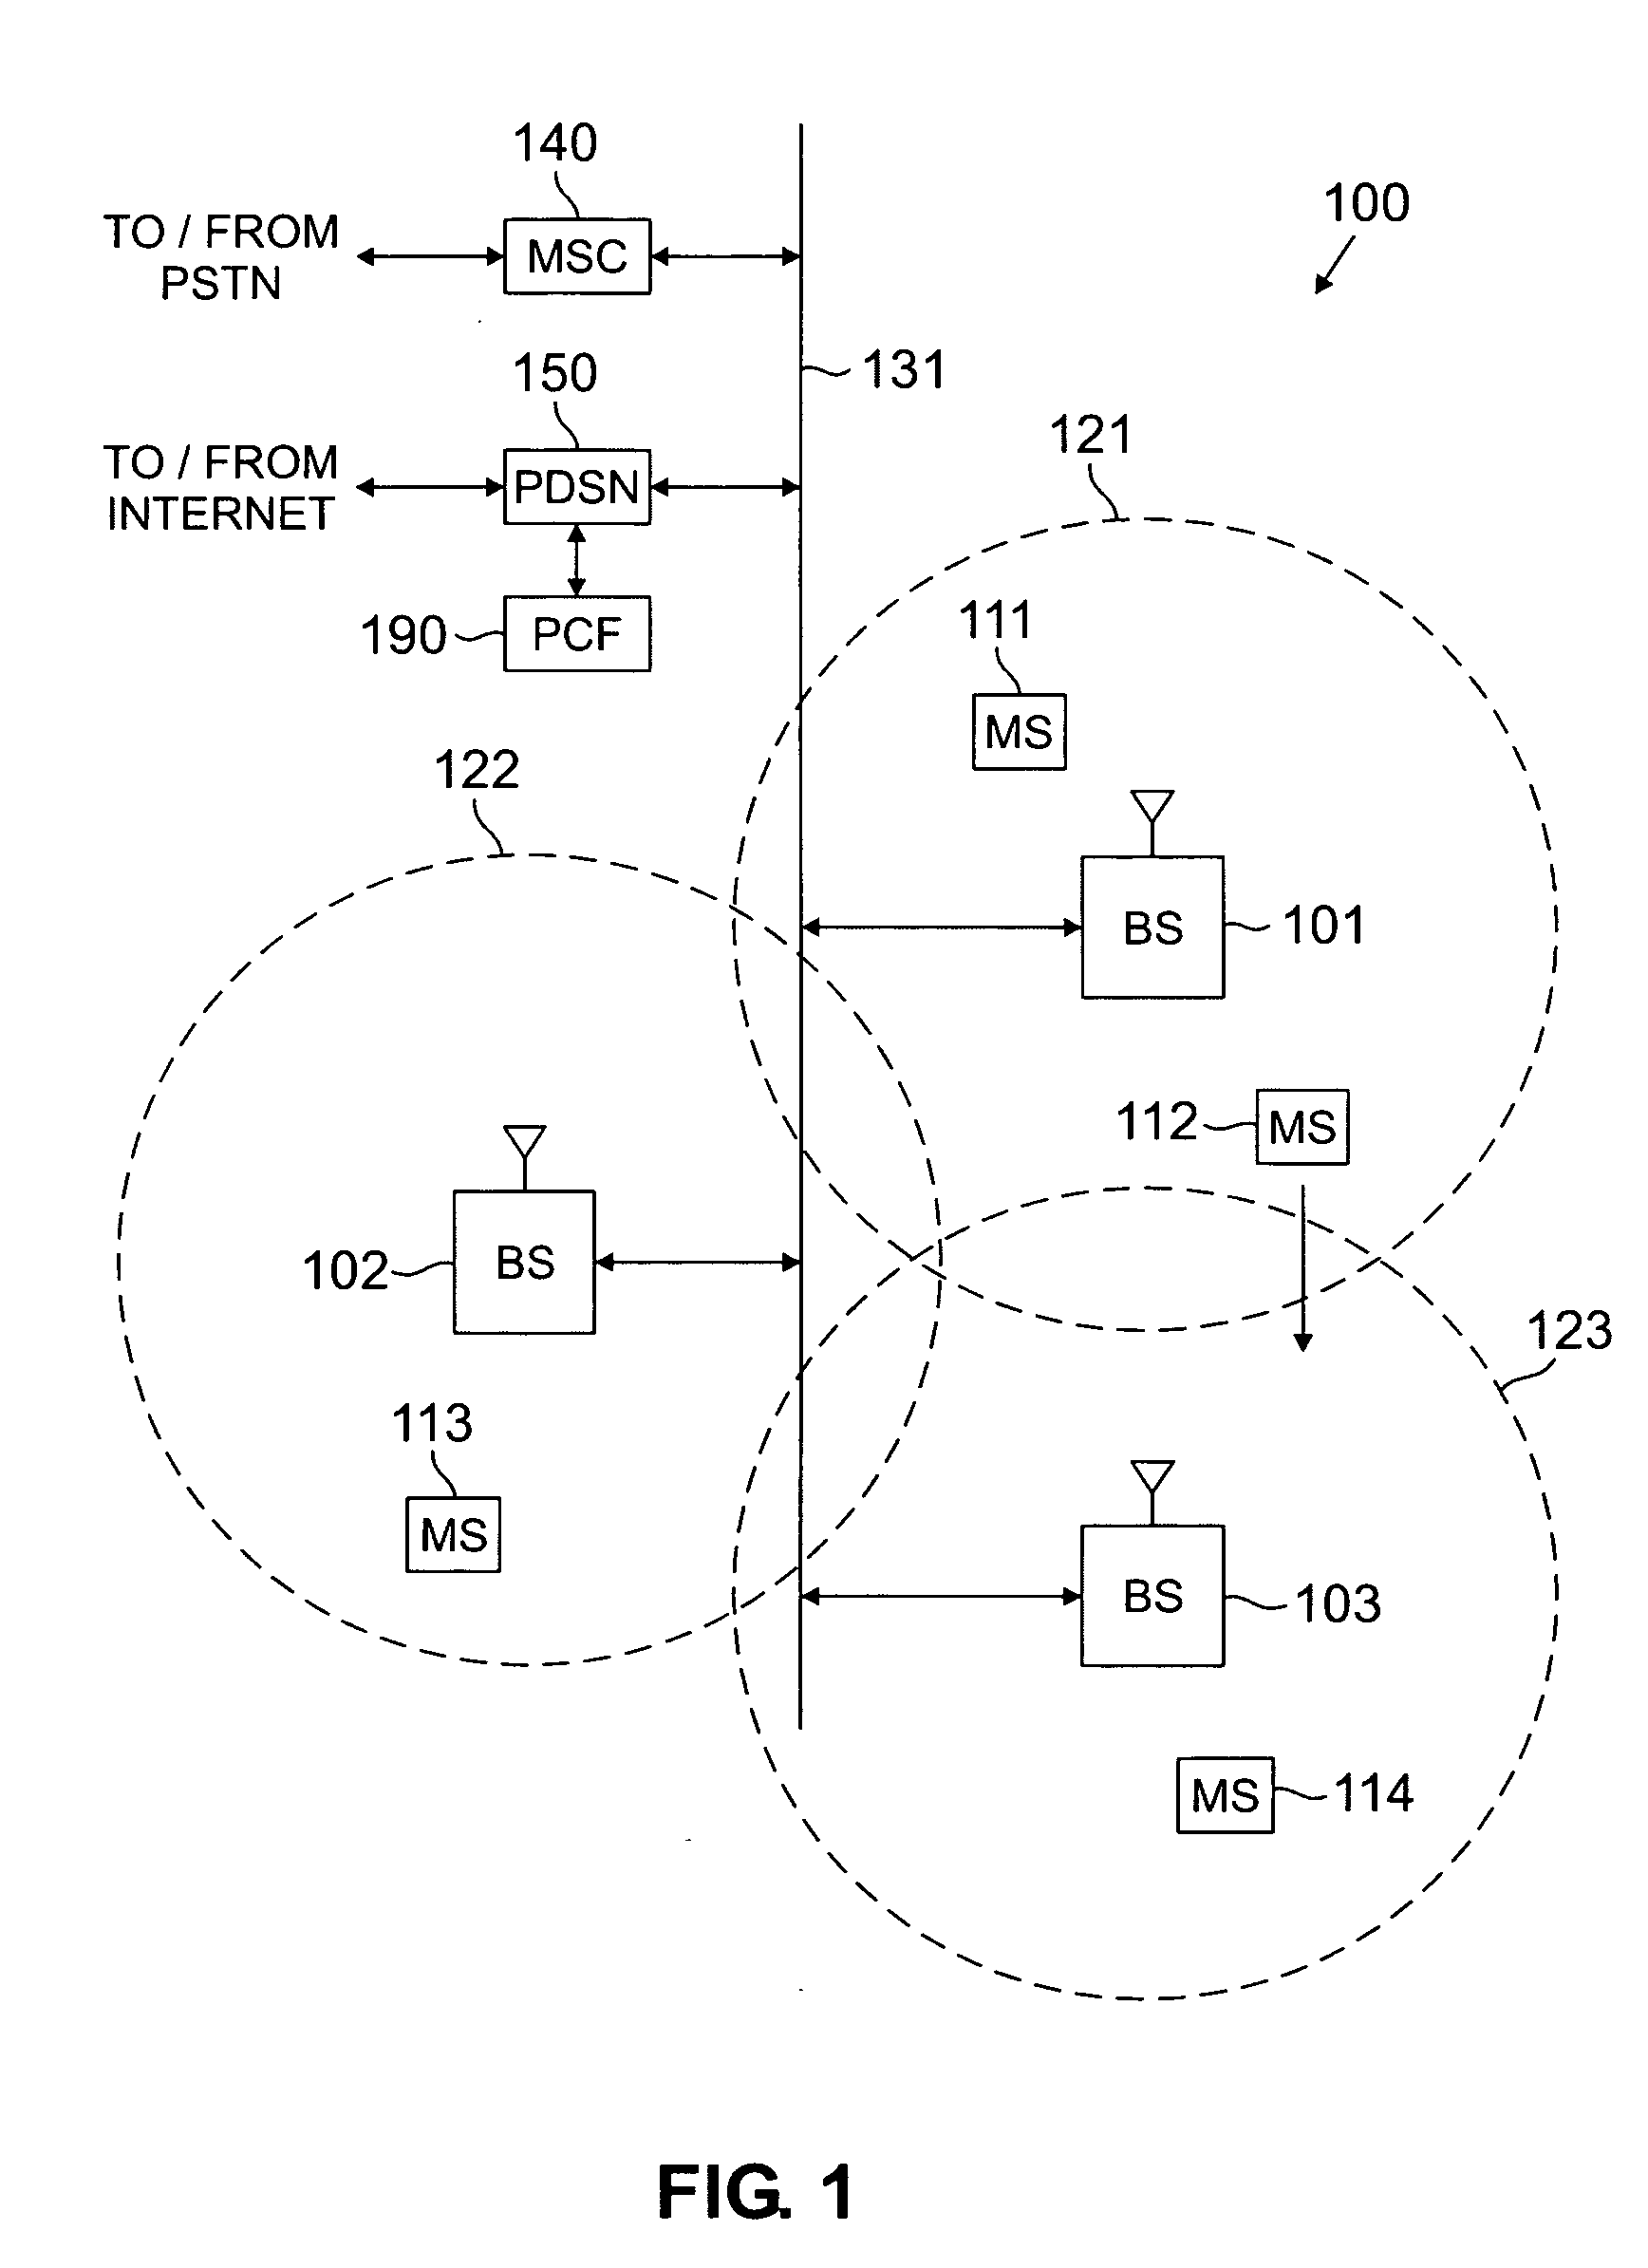 Apparatus and method for optimal power allocation between data and voice in a 1xEV-DV wireless network